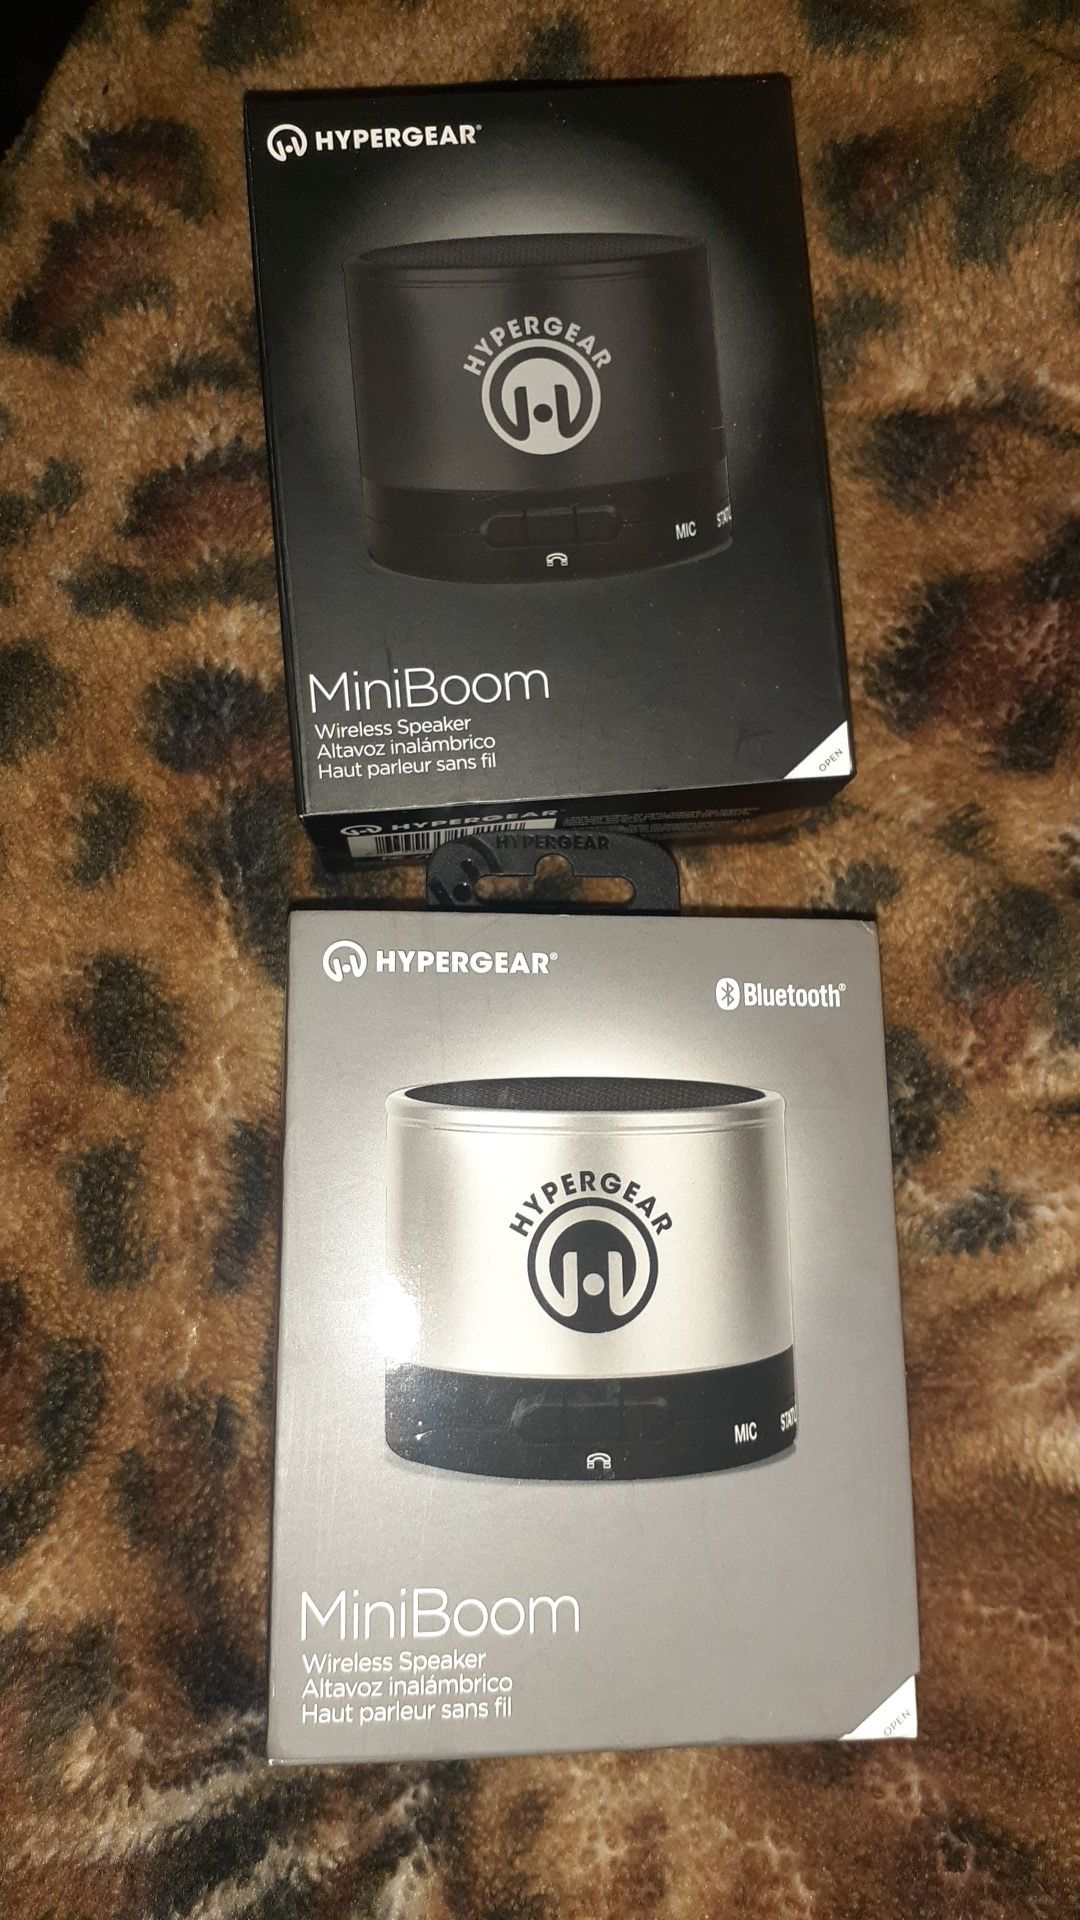 2 new never opened bluetooth speakers